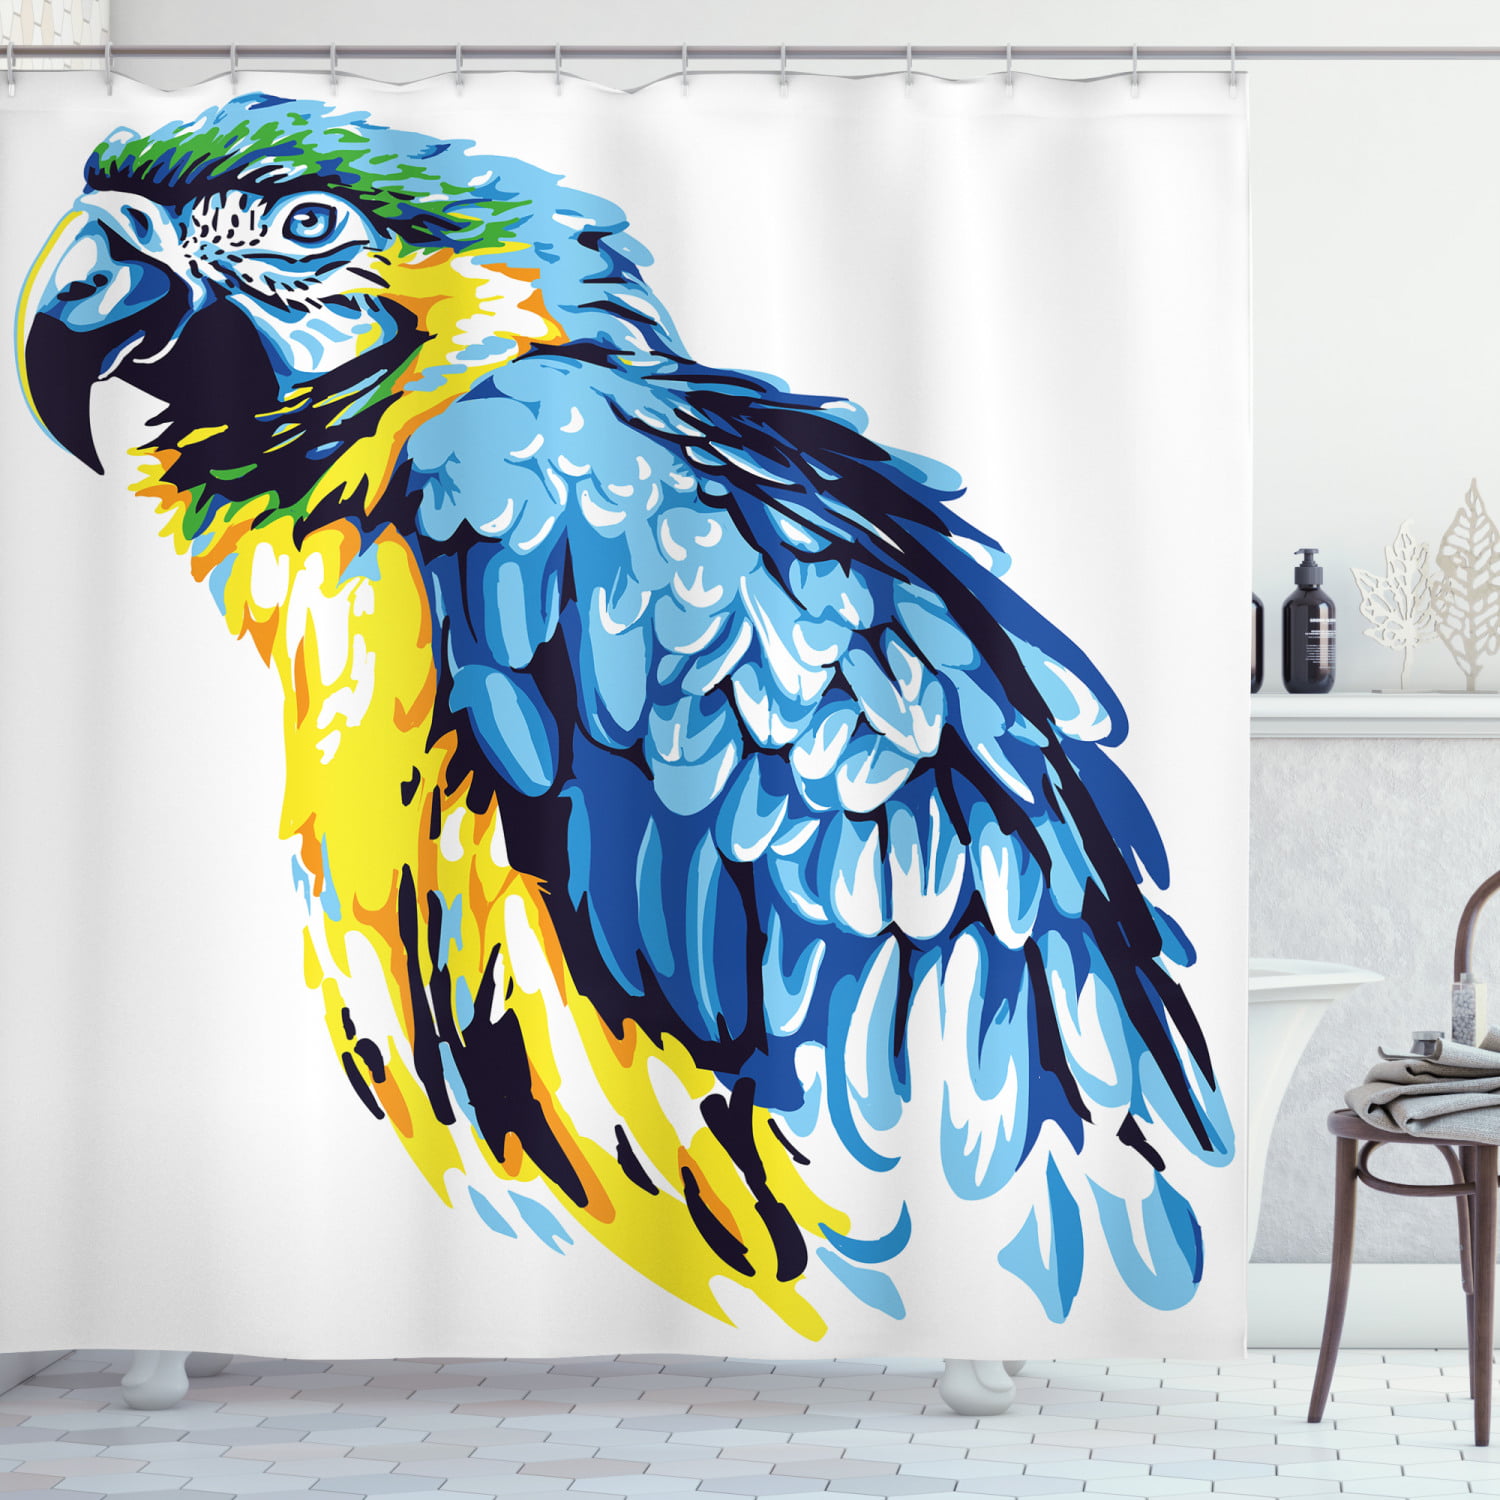 Two Macaw Parrot in Forest Bird Bath Shower Curtain Waterproof Fabric & Hook 71" 